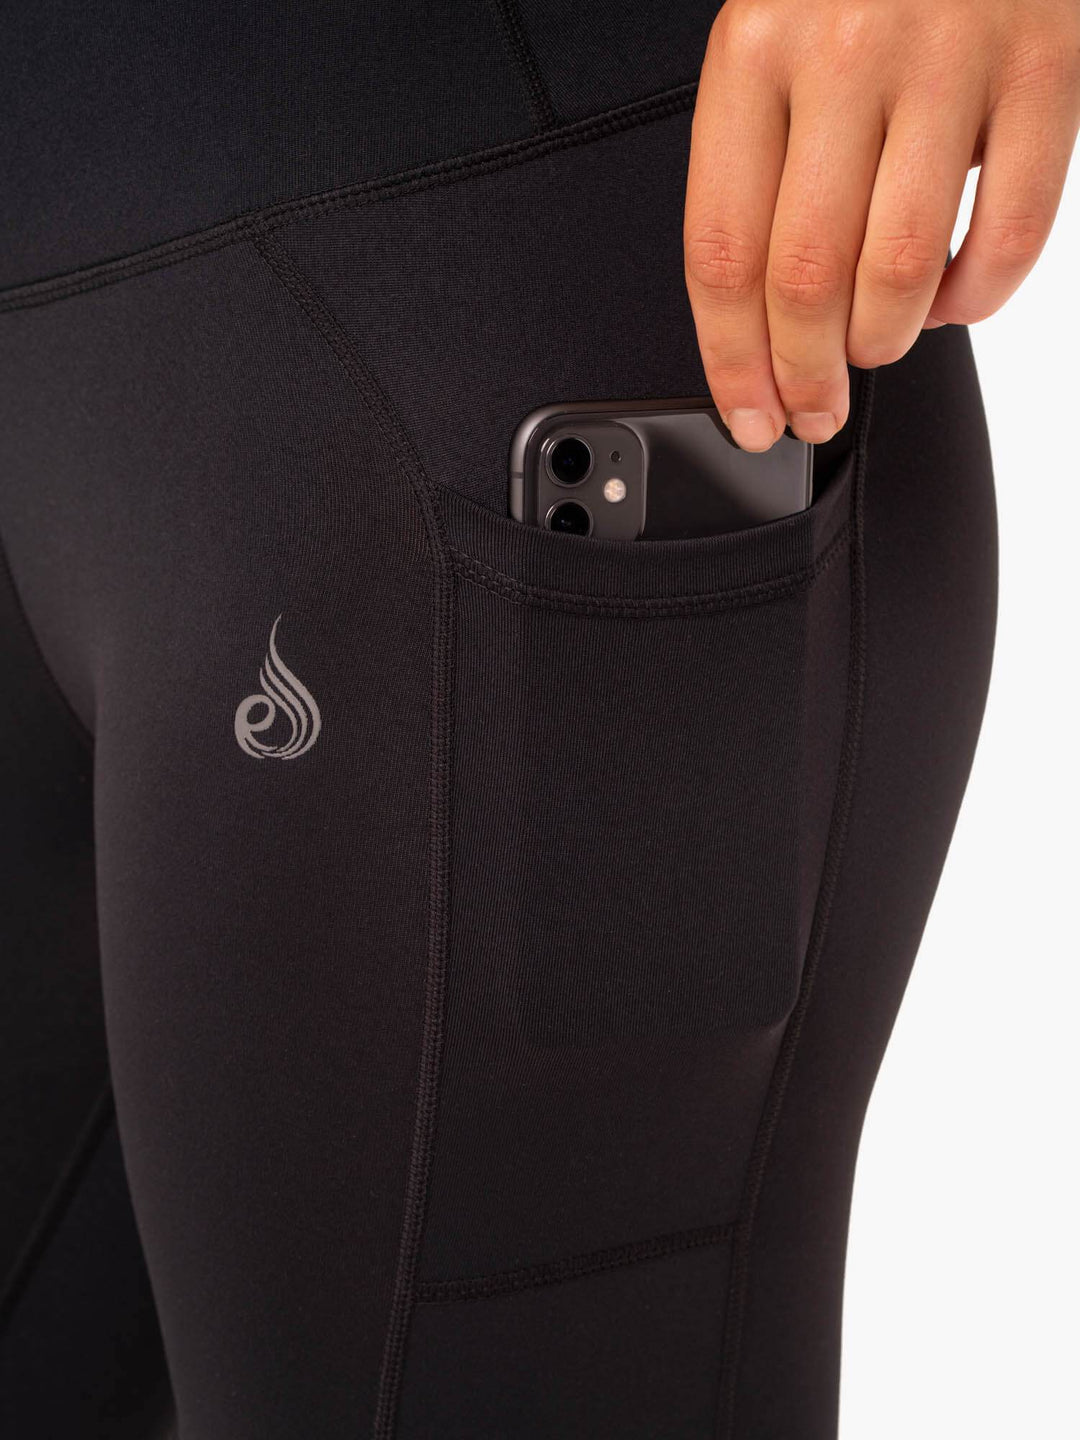 Nike Go Women's Firm-Support High-Waisted 7/8 Leggings with Pockets.  Nike.com